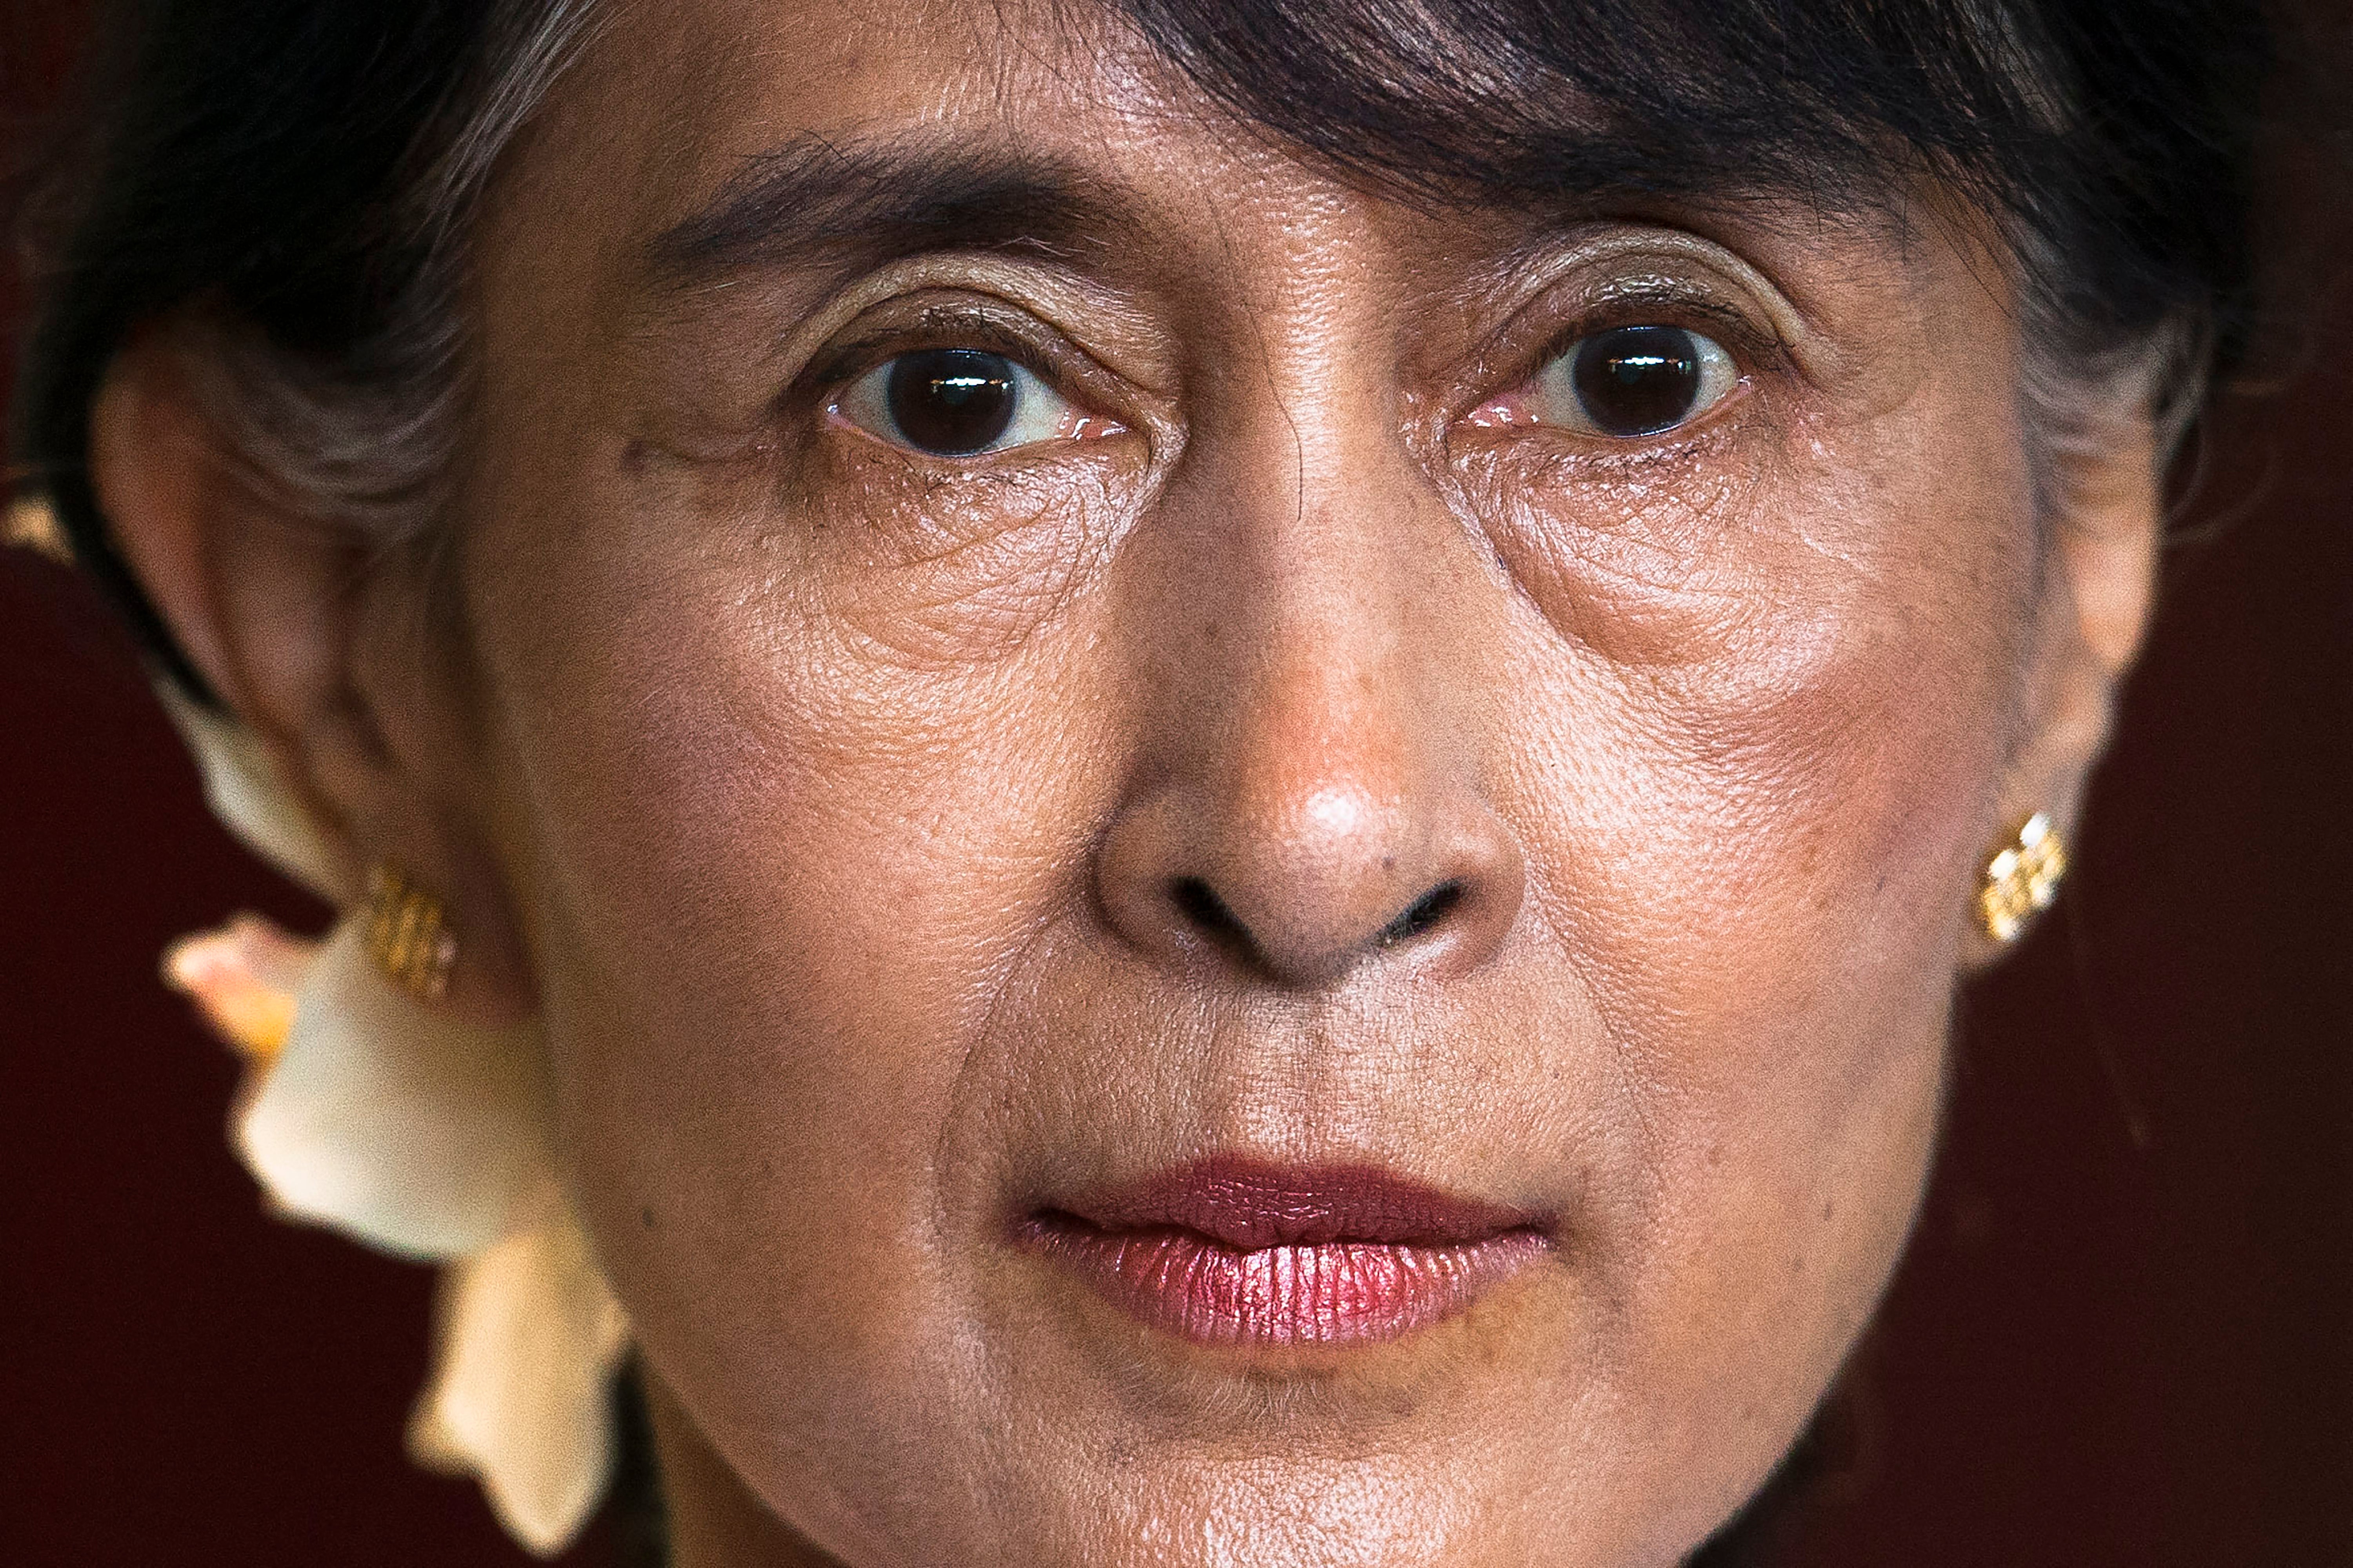 Aung San Suu Kyi is reportedly in such severe pain from gum disease that she is unable to eat